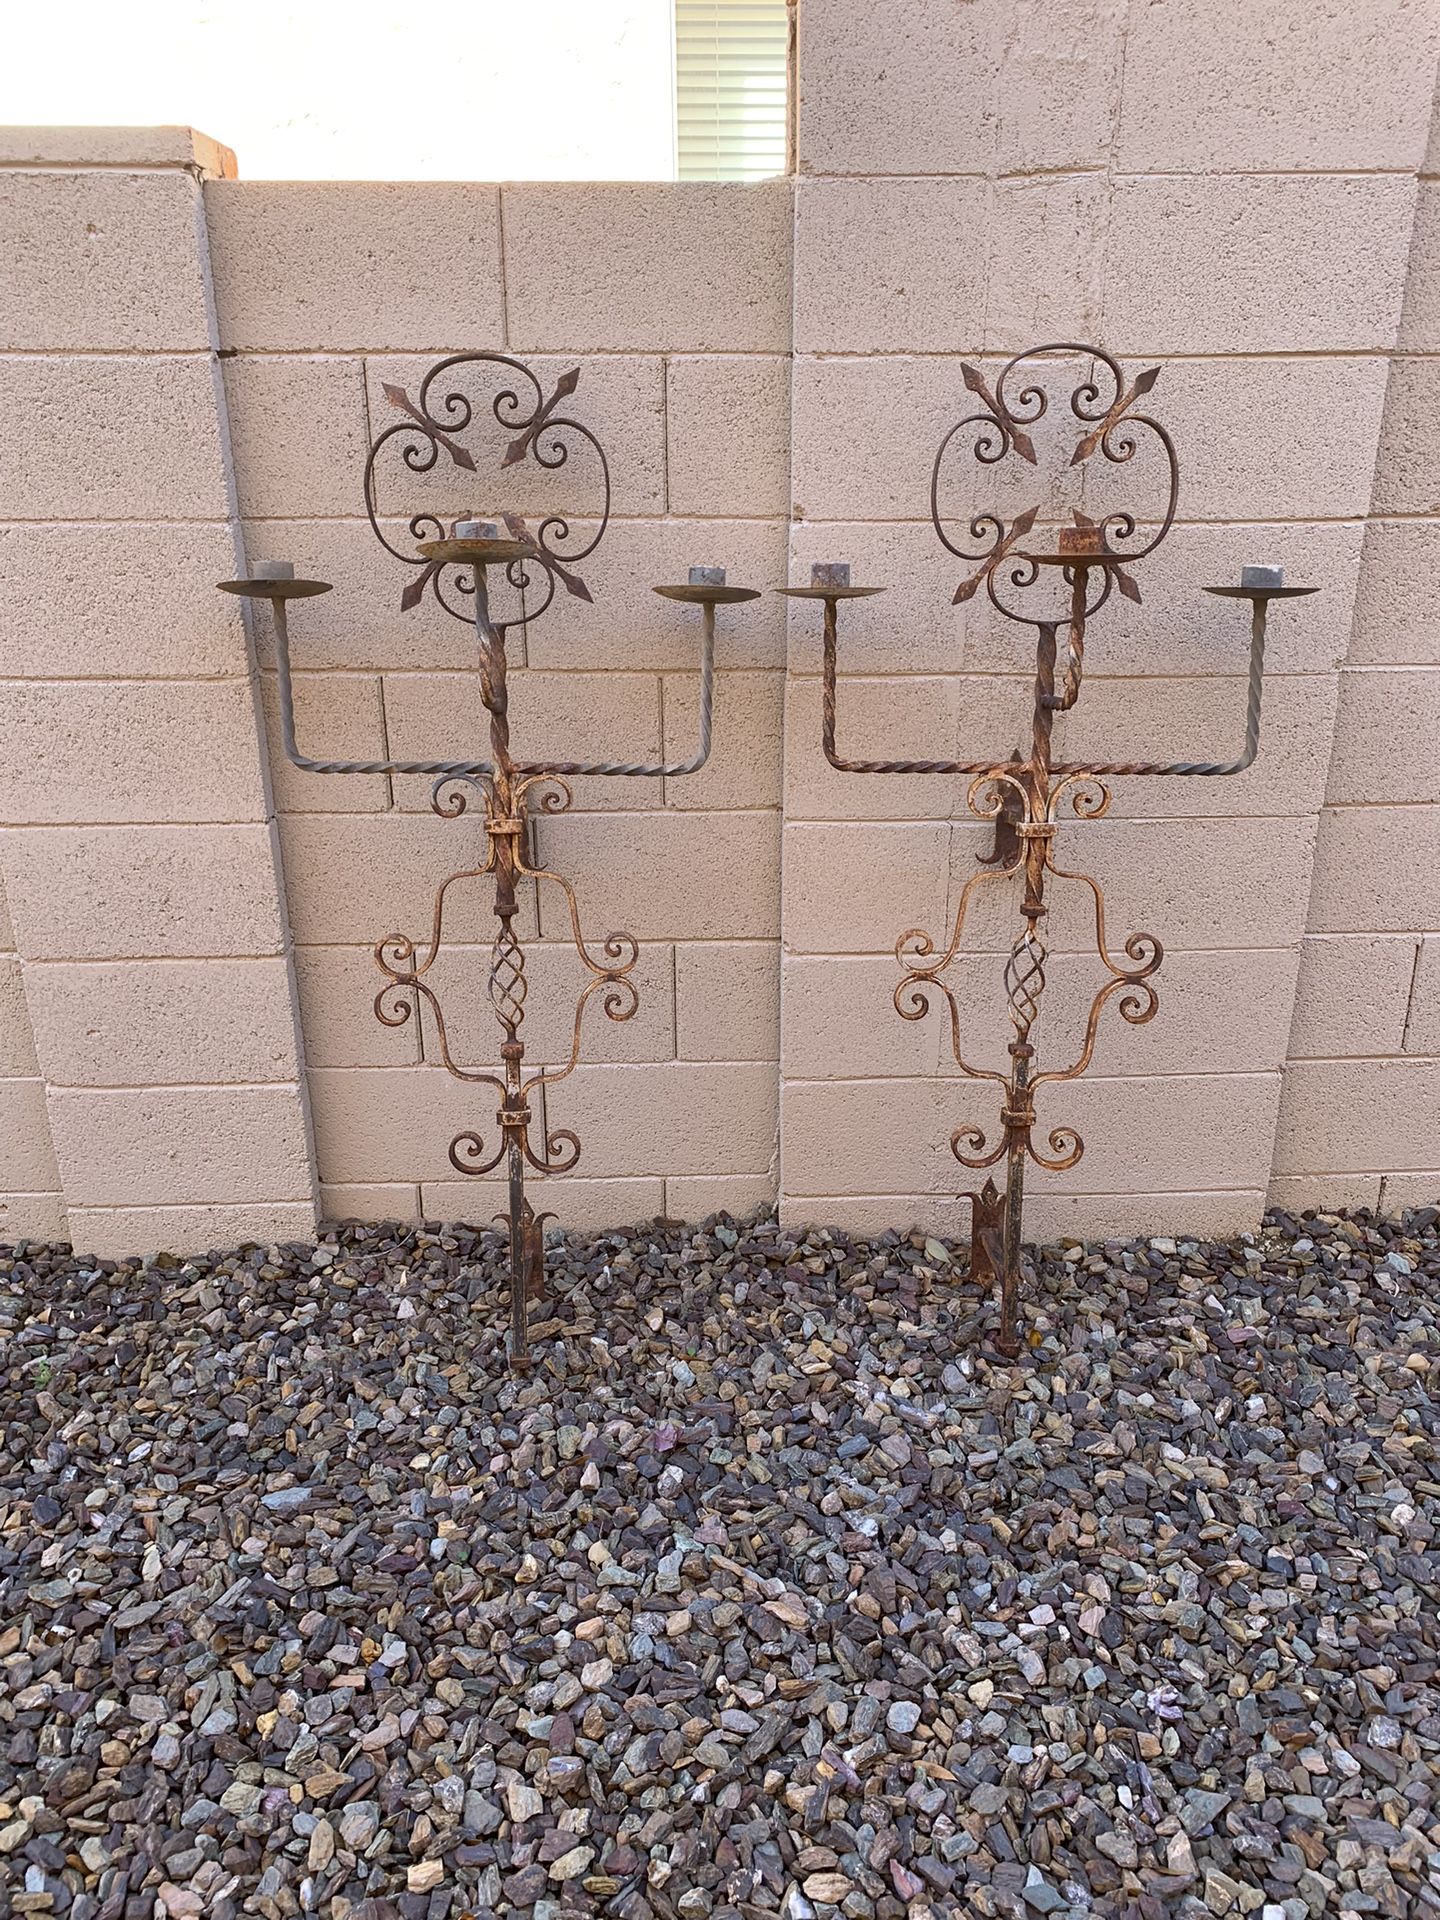 2 Candelabras Hand-made Of Forged Iron - 55”H X 24” Wide